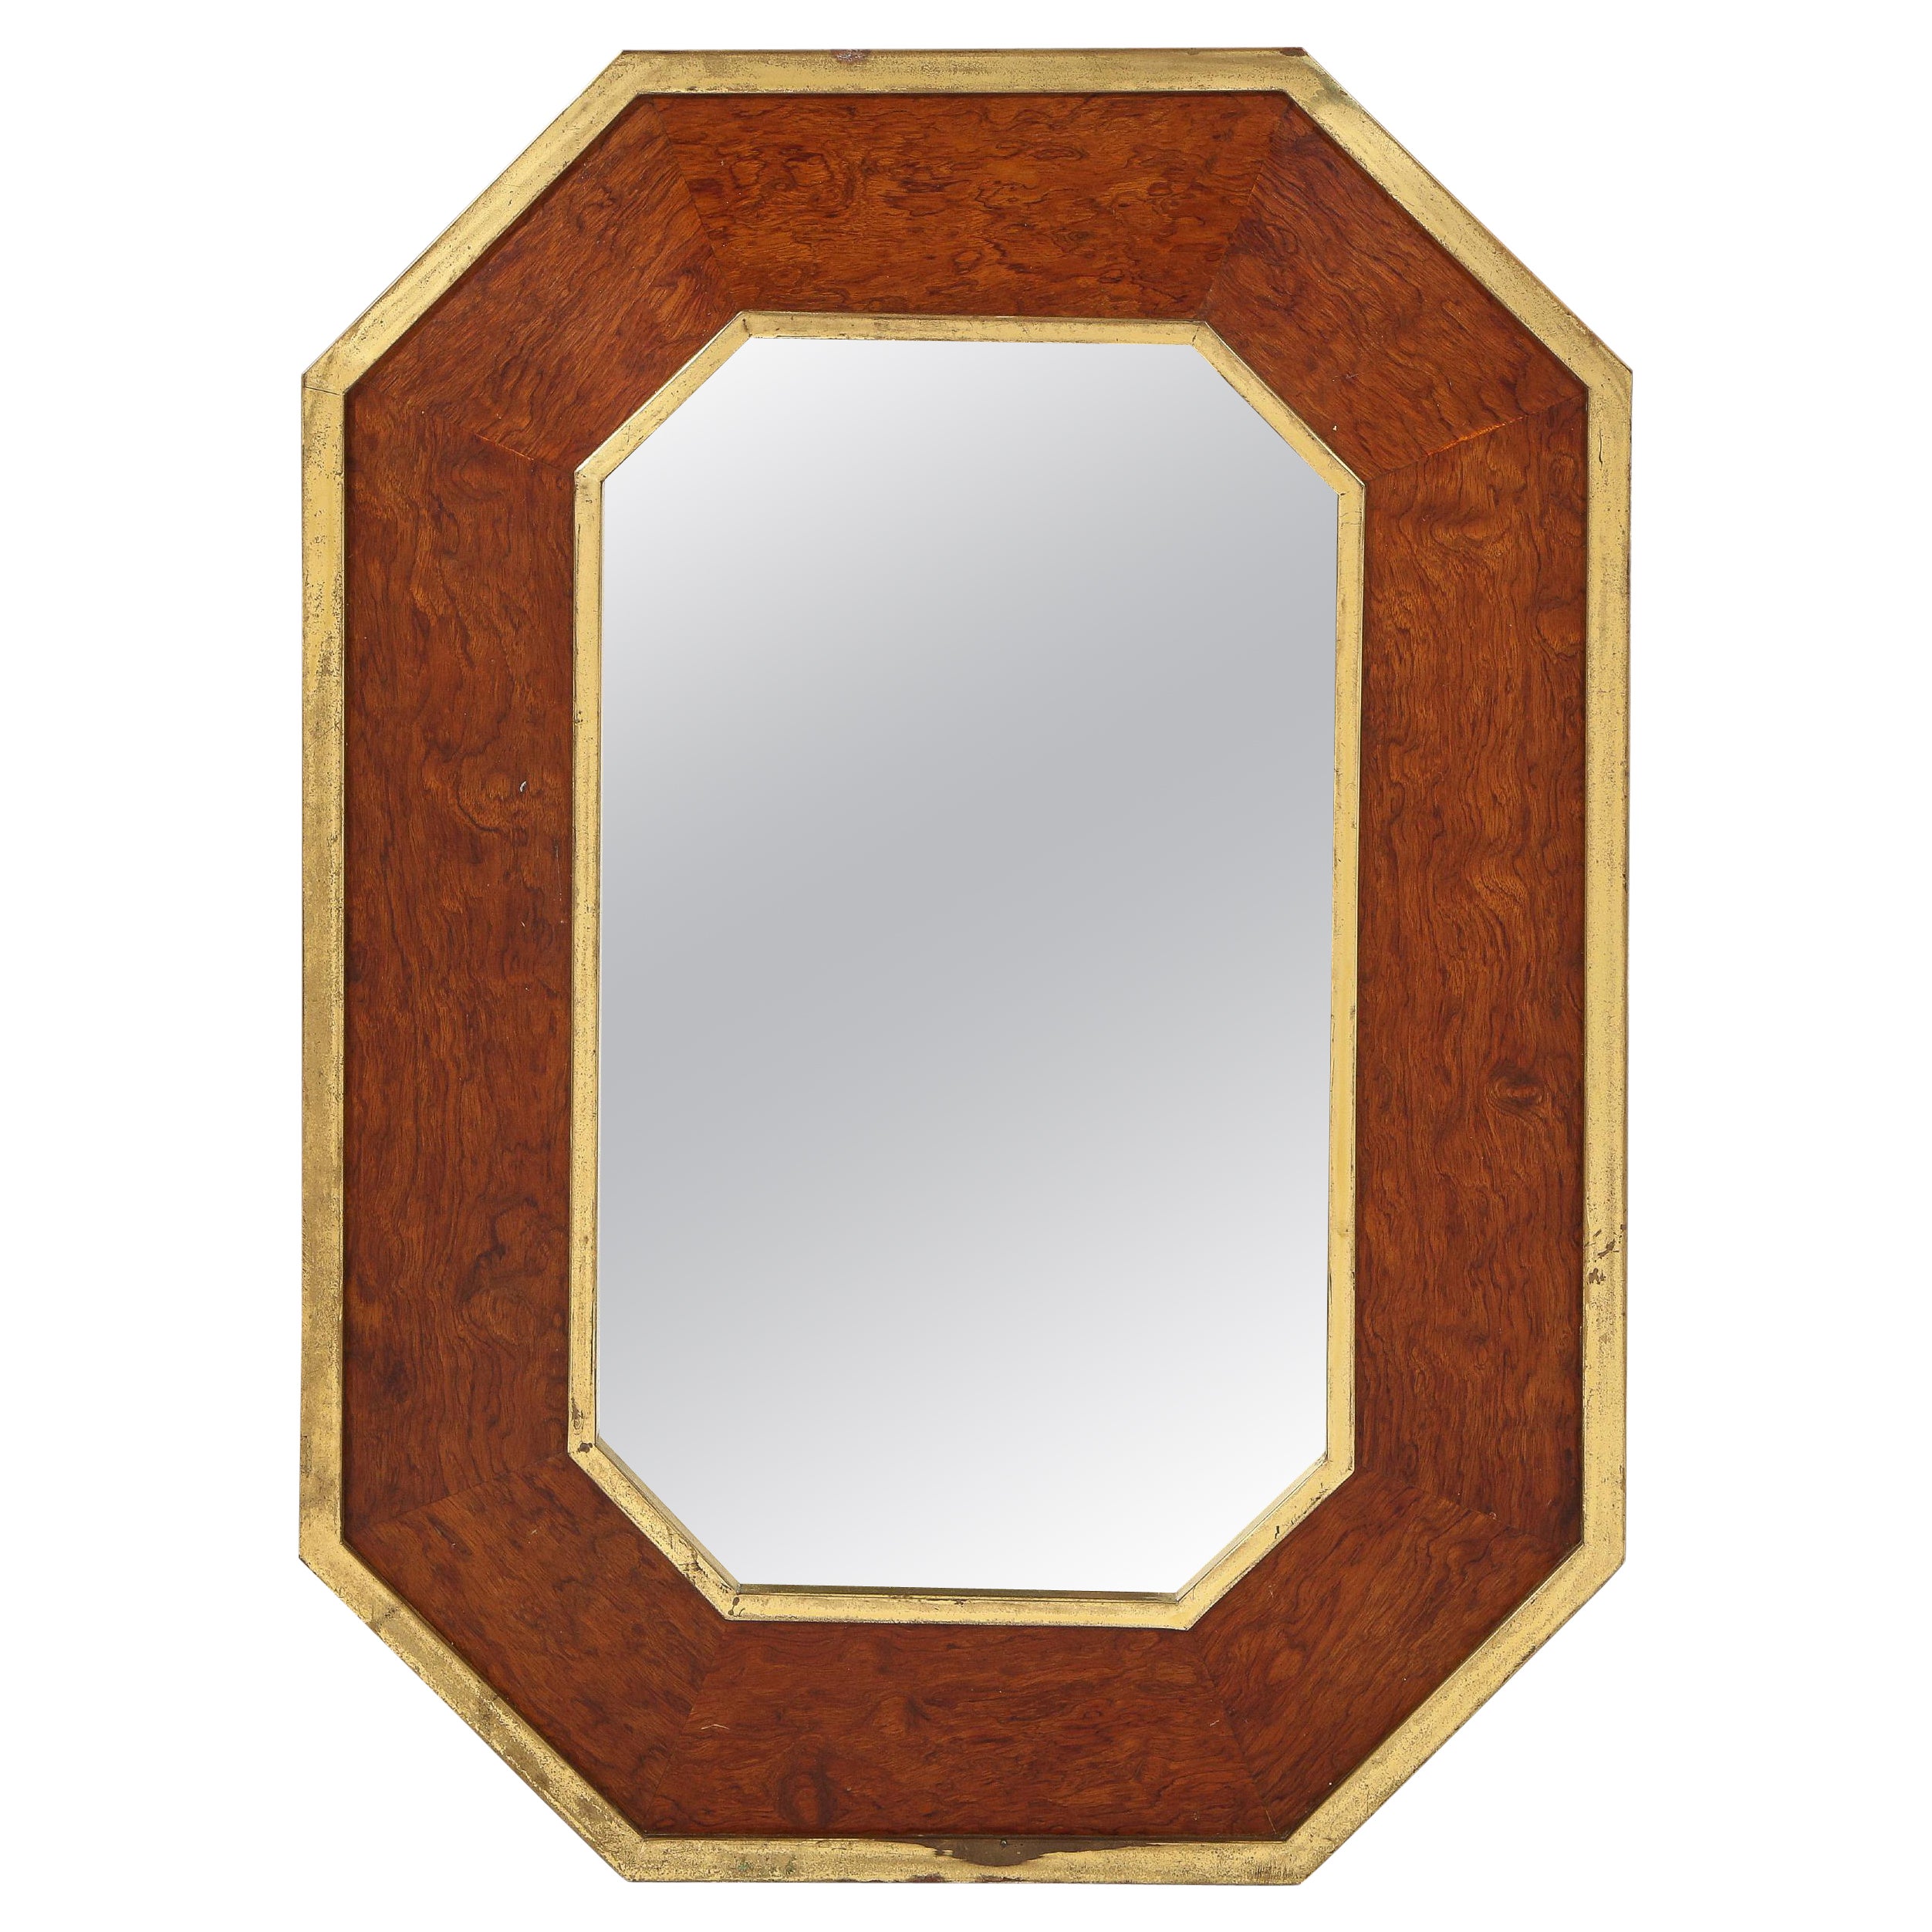 Burl and Brass Neoclassical Revival Octogonal Mirror, France 1960's For Sale